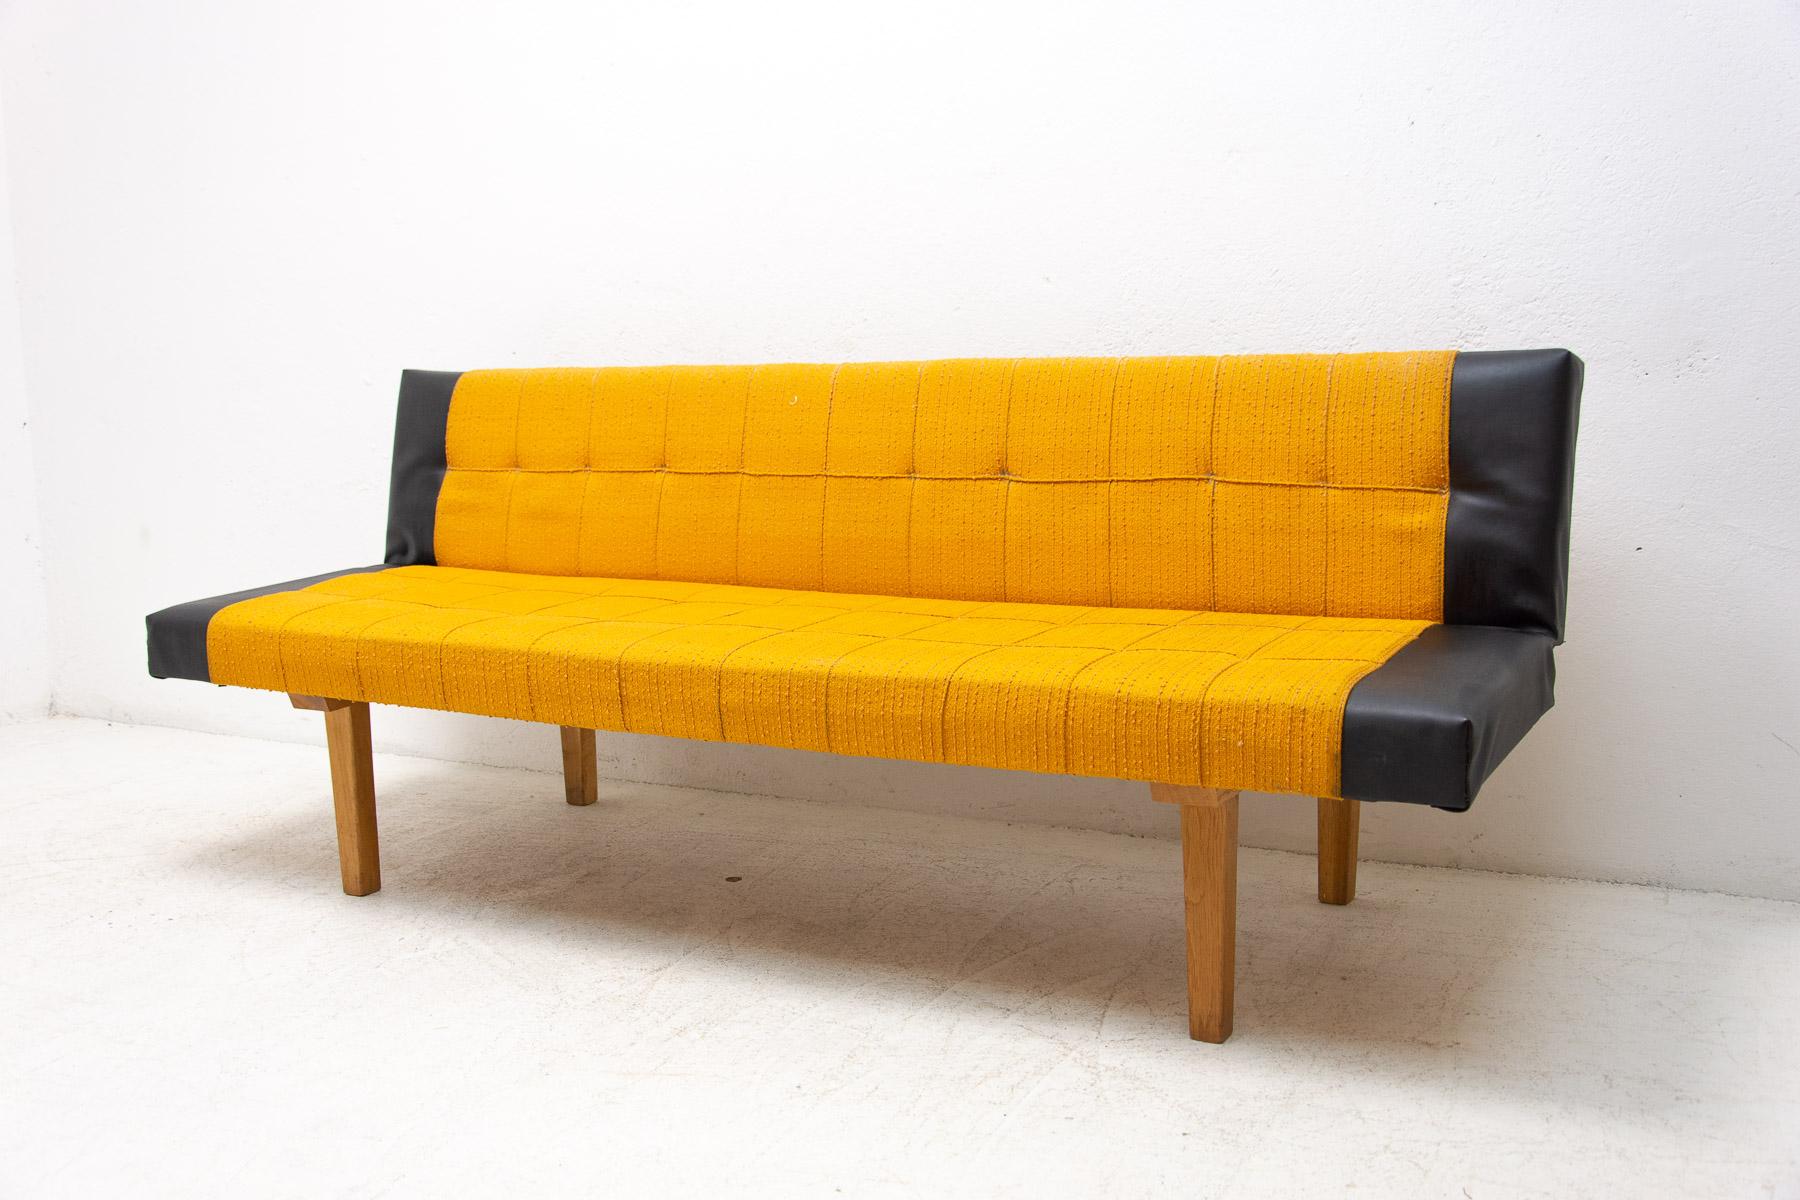 Mid century folding sofa-bench by Miroslav Navrátil, made in the former Czechoslovakia in the 1970s. It features very attractive and simple design. Material: fabric, beechwood, leatherette.
The bench is in good Vintage condition.

Length 195